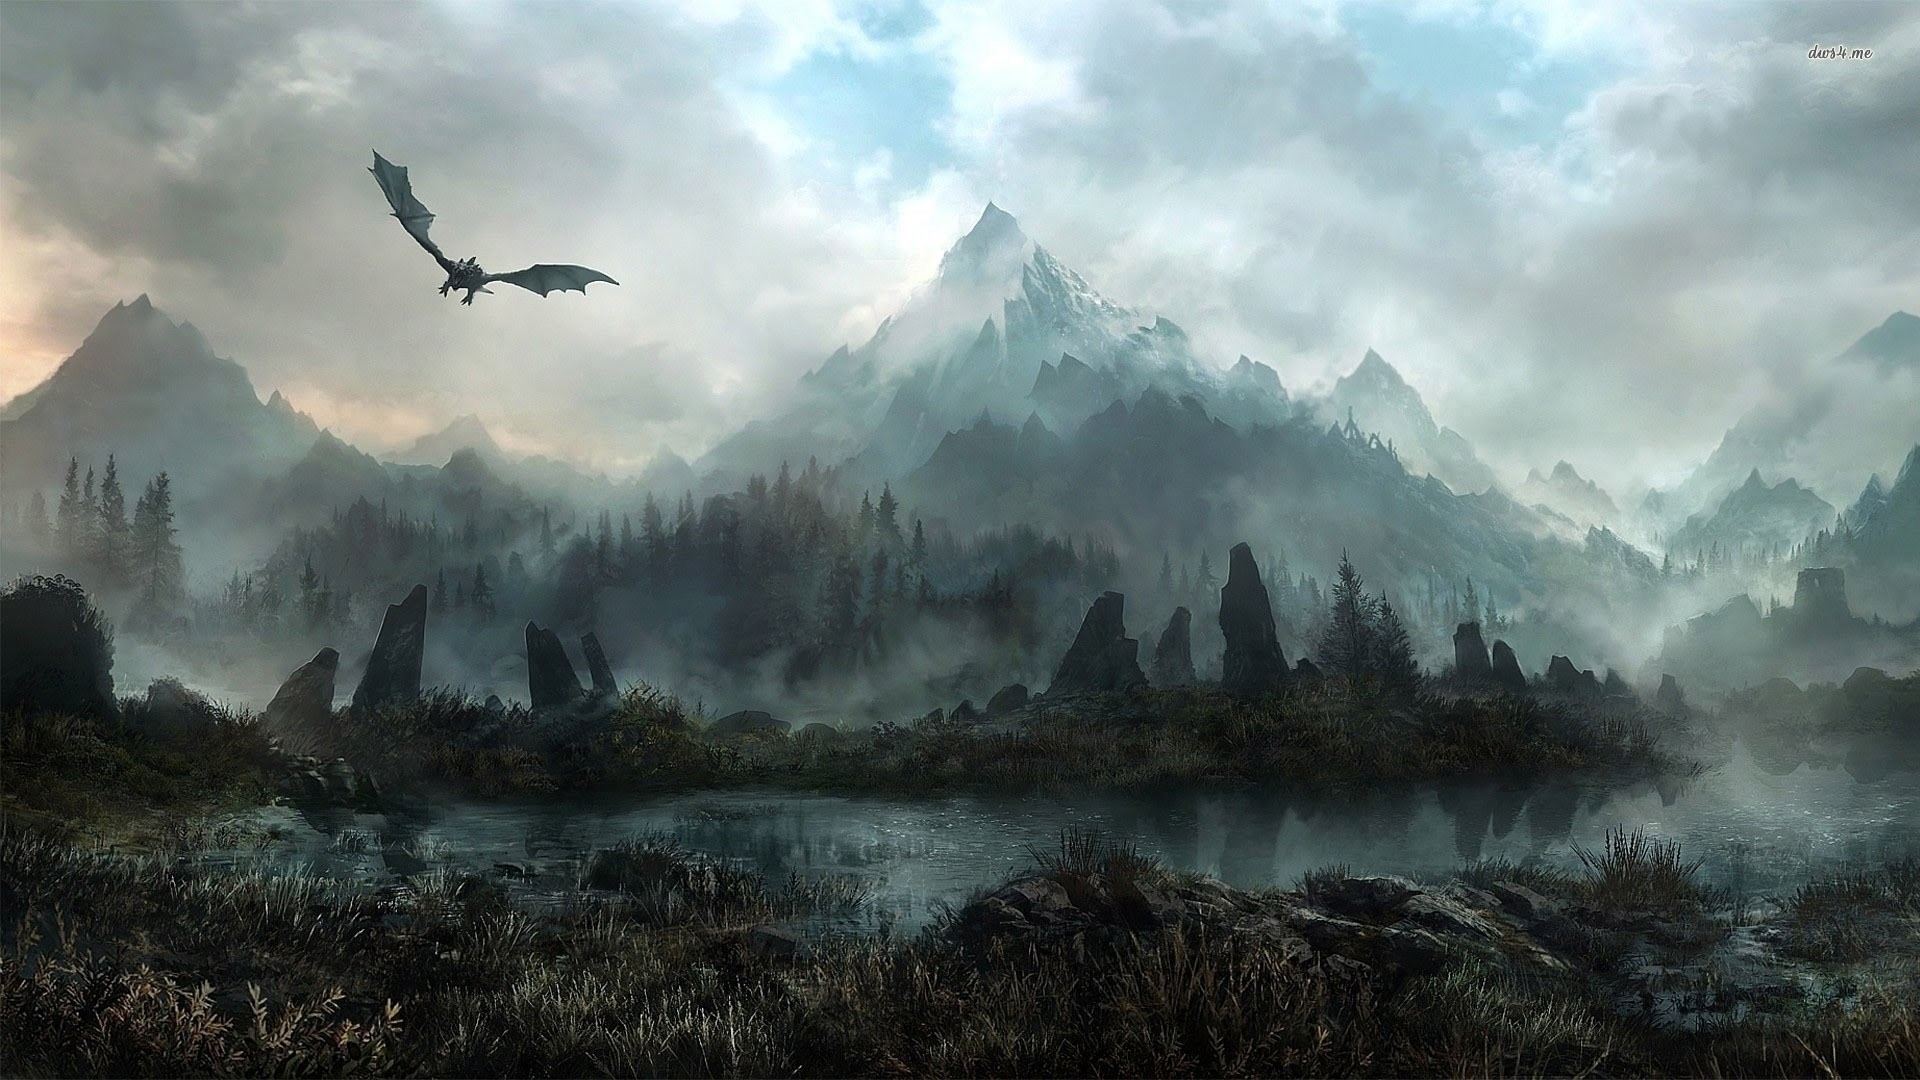 1920x1080 Title : epic fantasy wallpapers high resolution on wallpaper 1080p hd.  Dimension : 1920 x 1080. File Type : JPG/JPEG